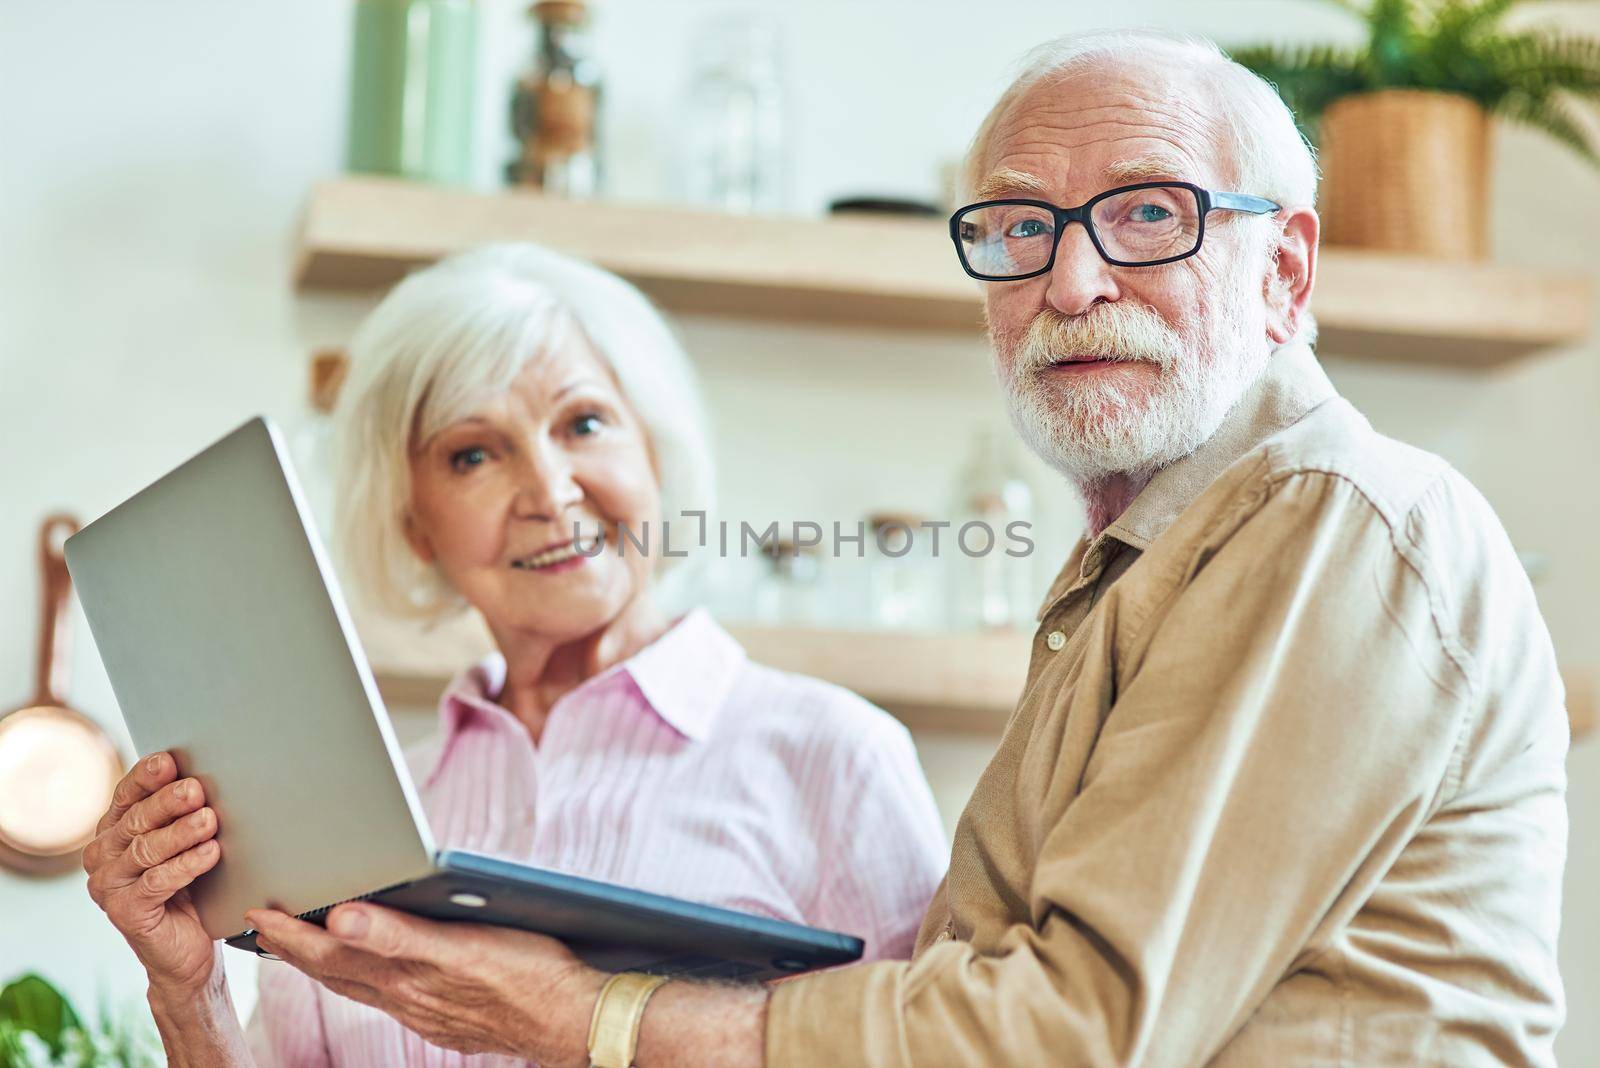 Smiling senior couple standing at the kitchen while using laptop and looking at camera at their home. Lifestyle concept